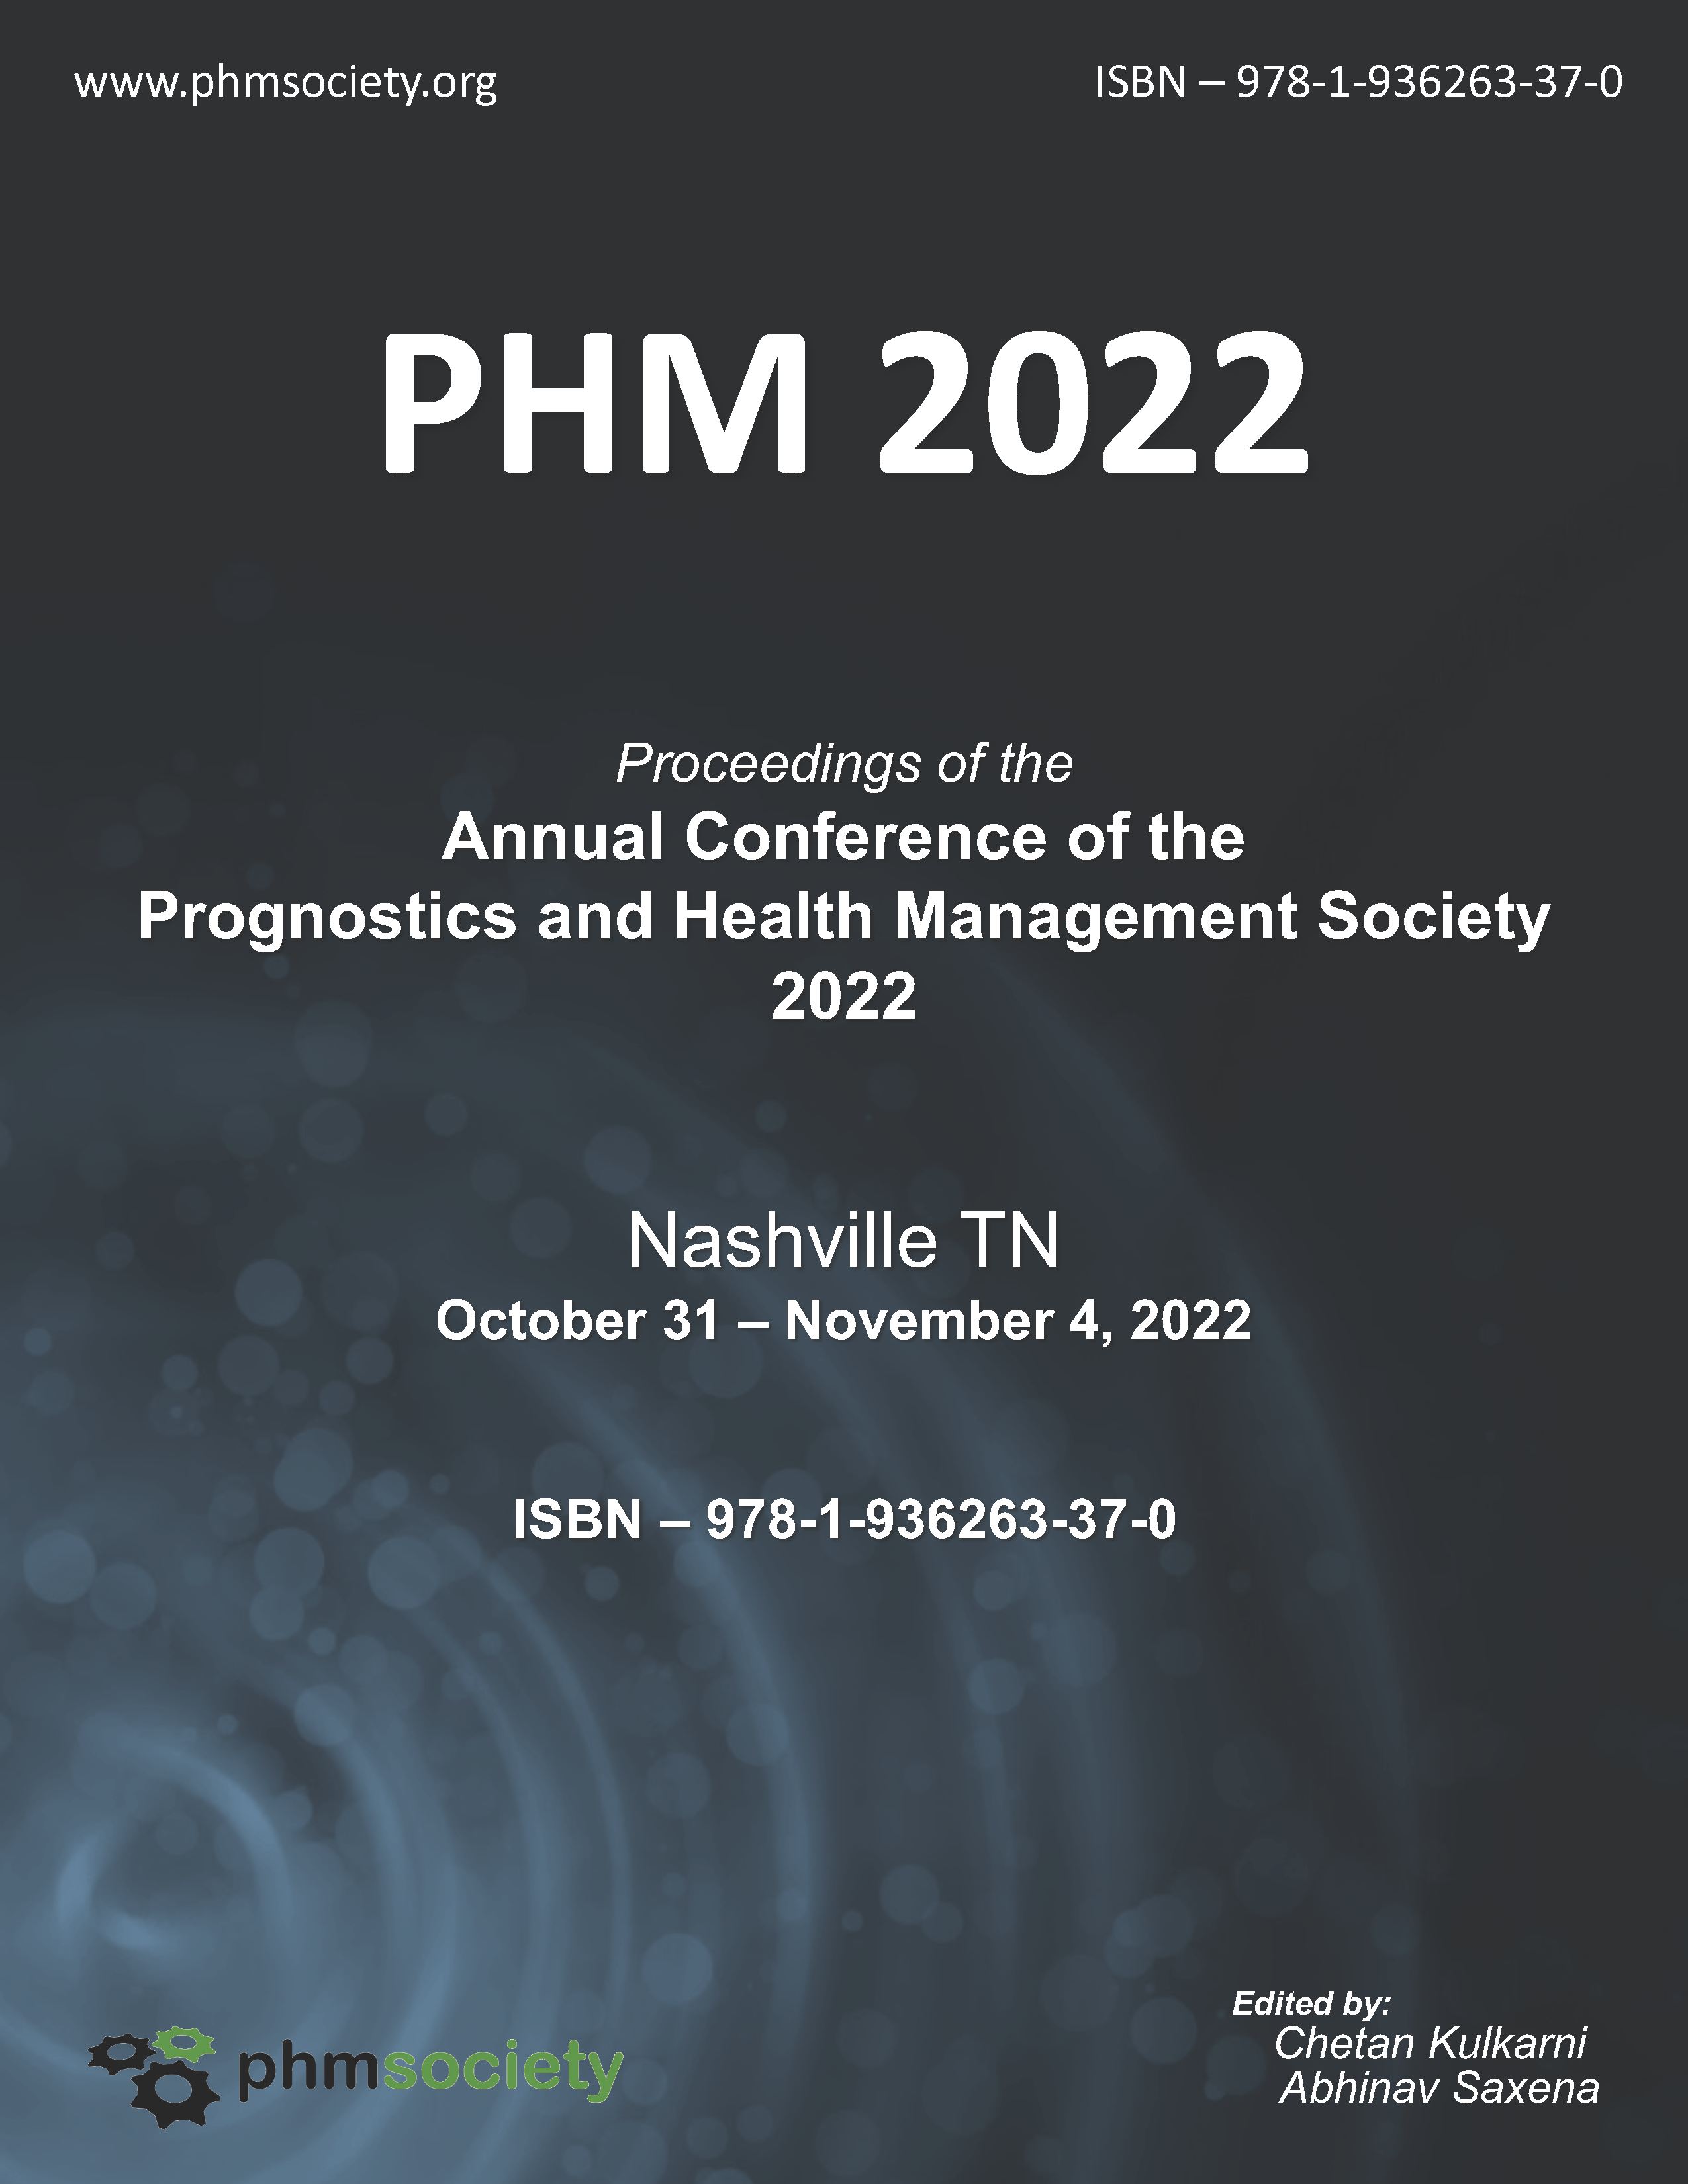 Annual Conference of the PHM Society